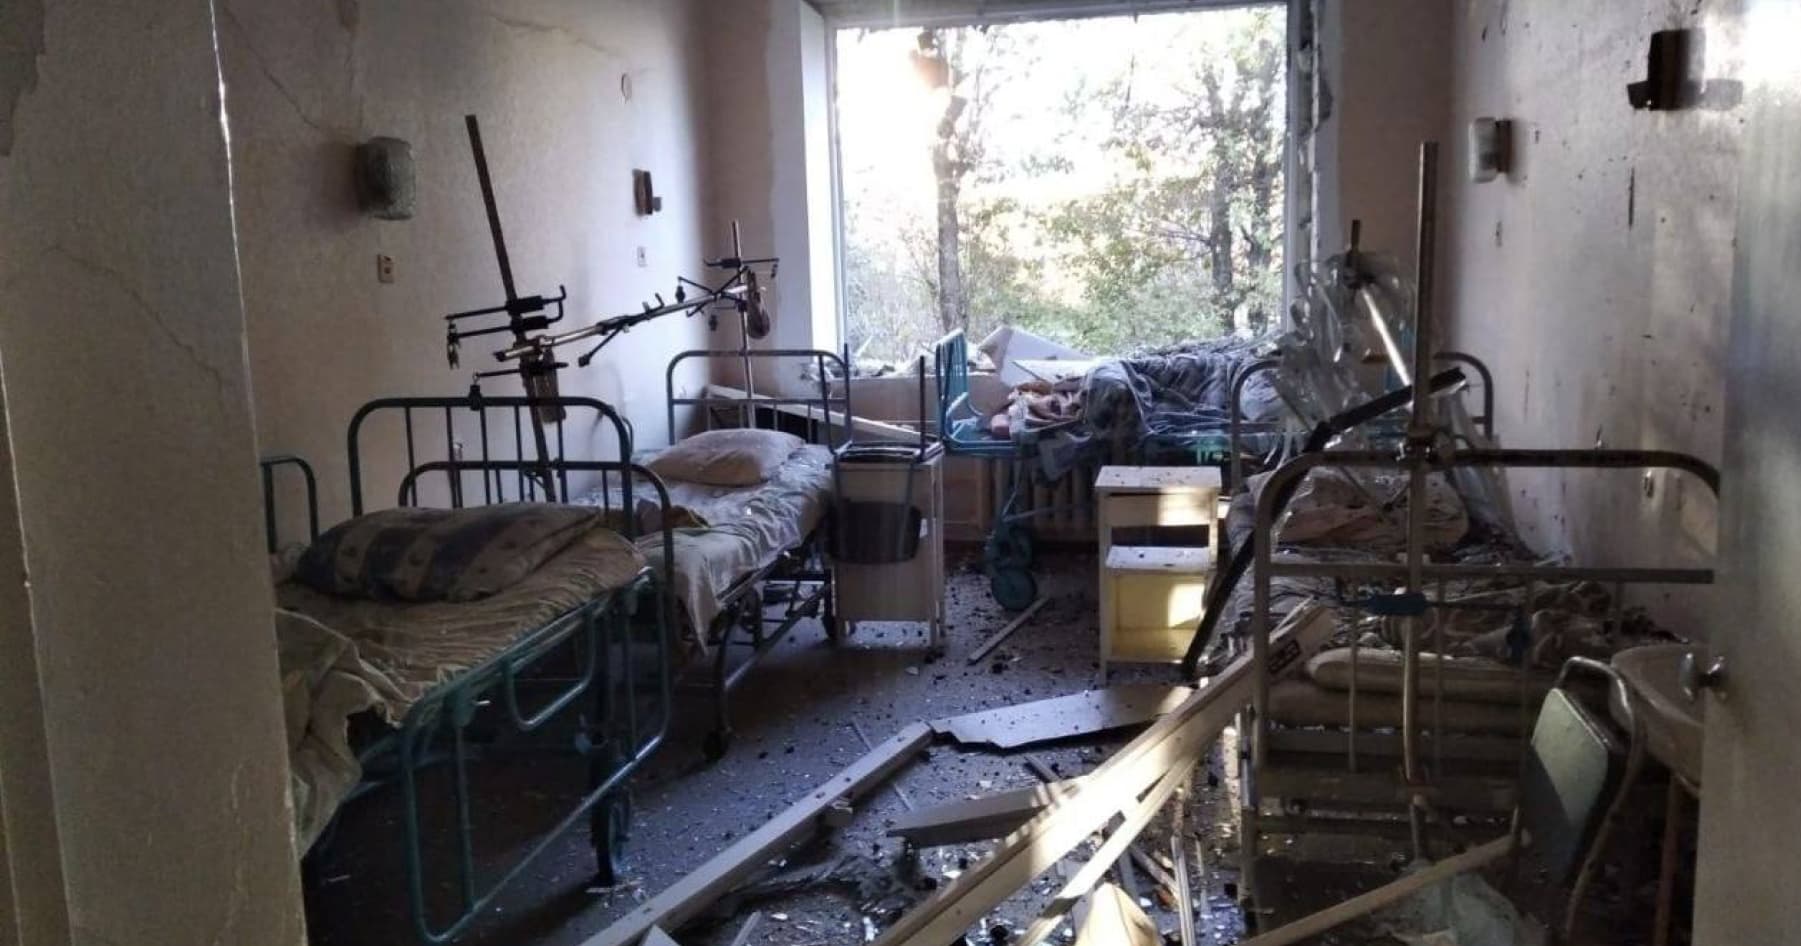 The Russian military shelled a hospital in the Kupiansk district of the Kharkiv region